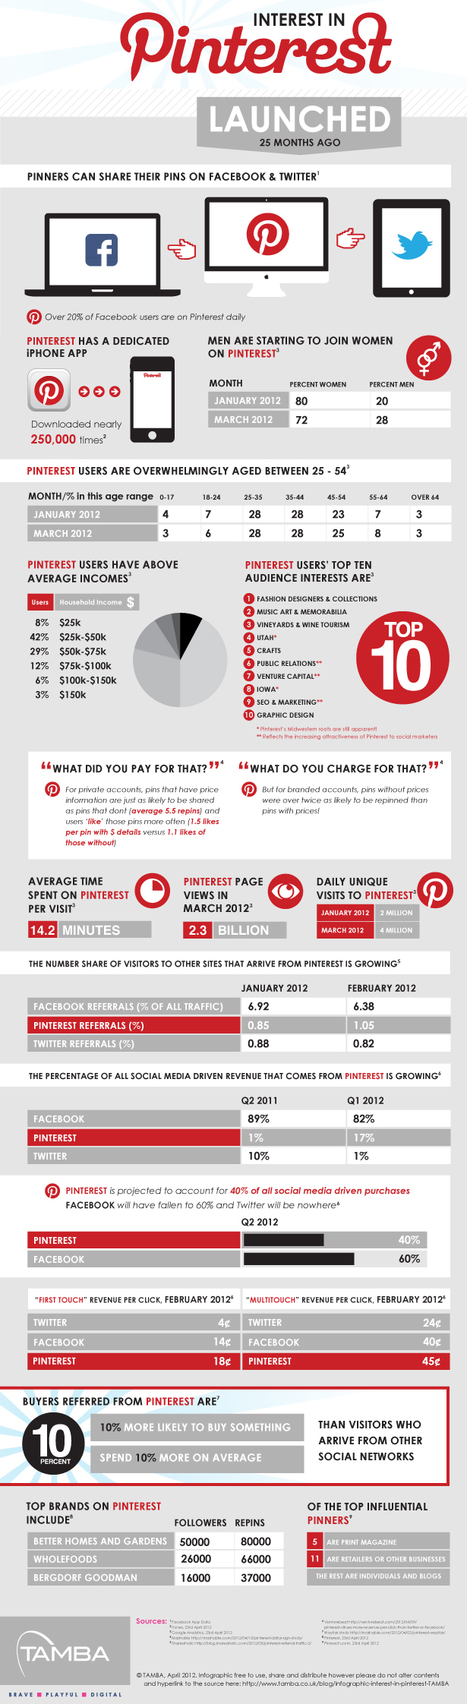 Interest Stats in Pinterest Infographic | Social Media Resources & e-learning | Scoop.it